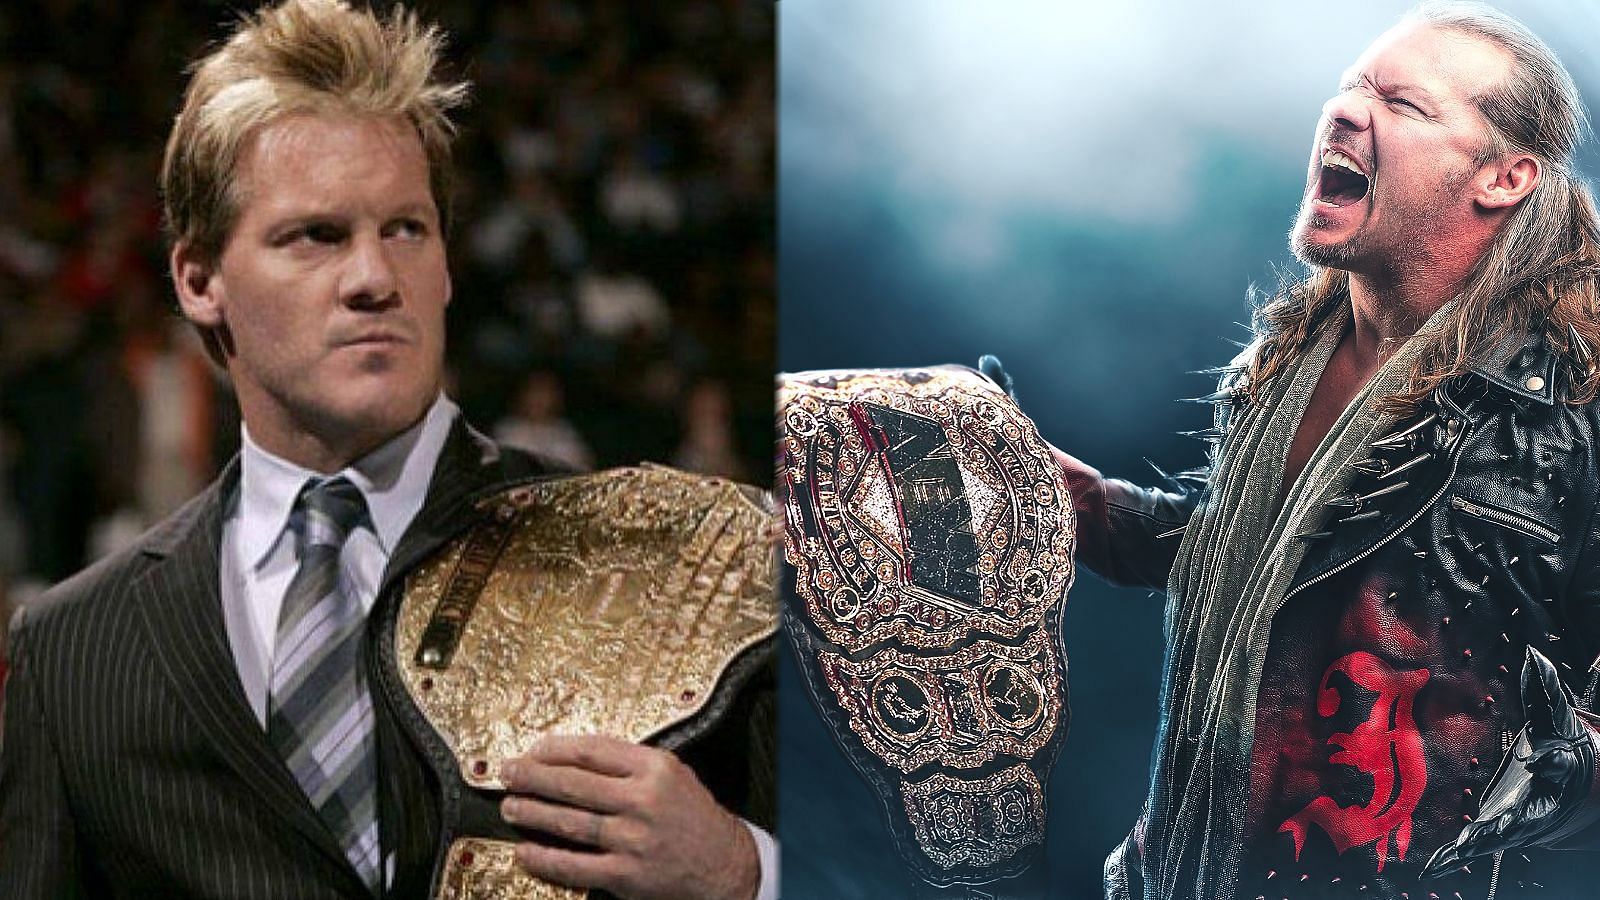 Some notable WWE names have gone on to win Championship gold in AEW.